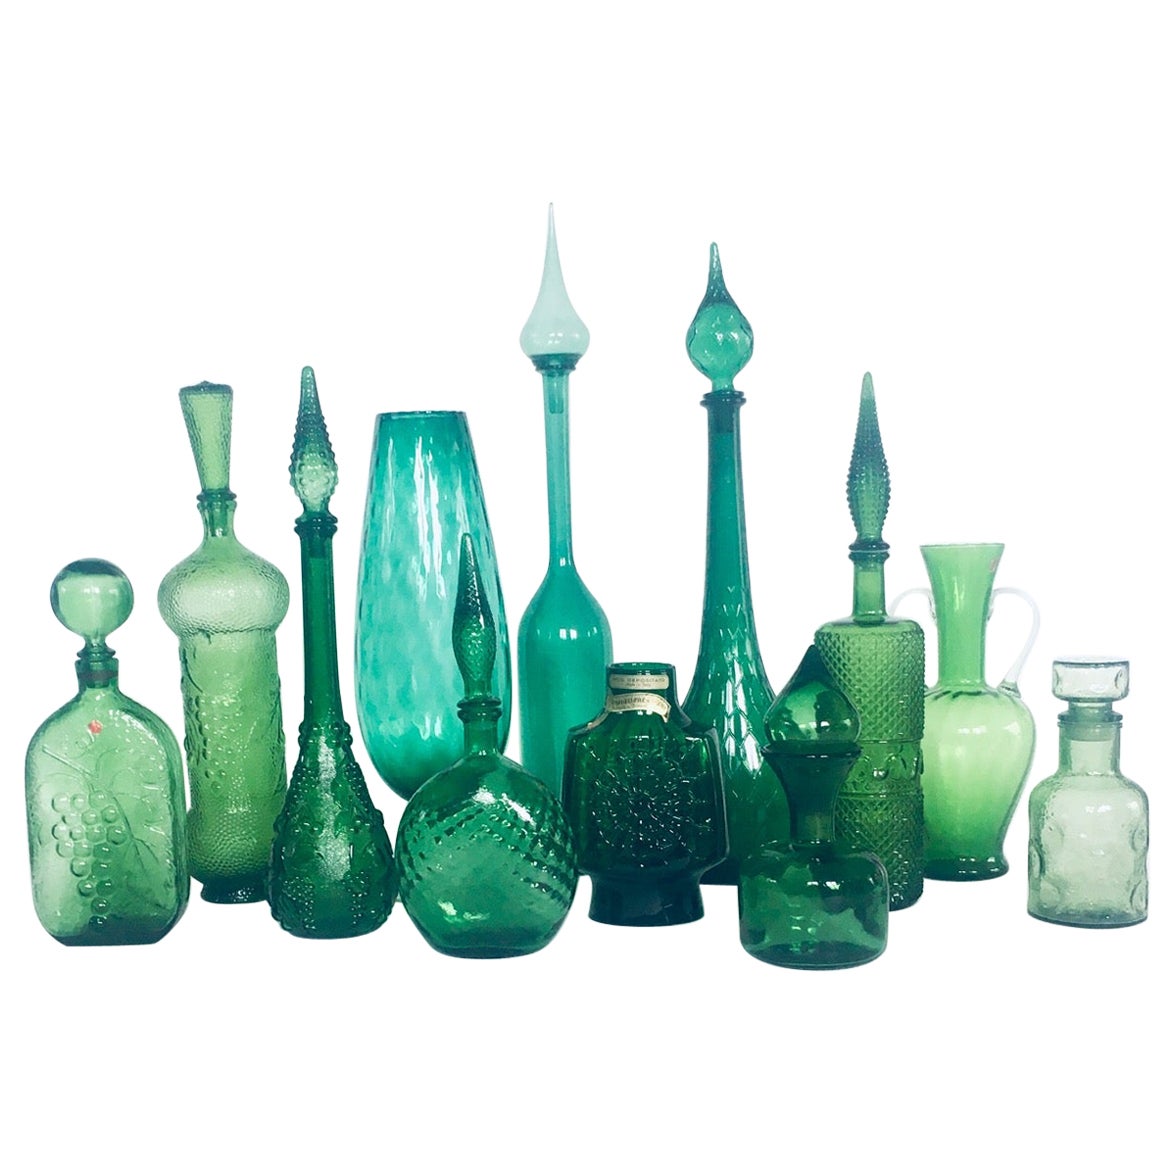 1960's Collection of Vintage Green Glass Vases & Decanters, Set of 12